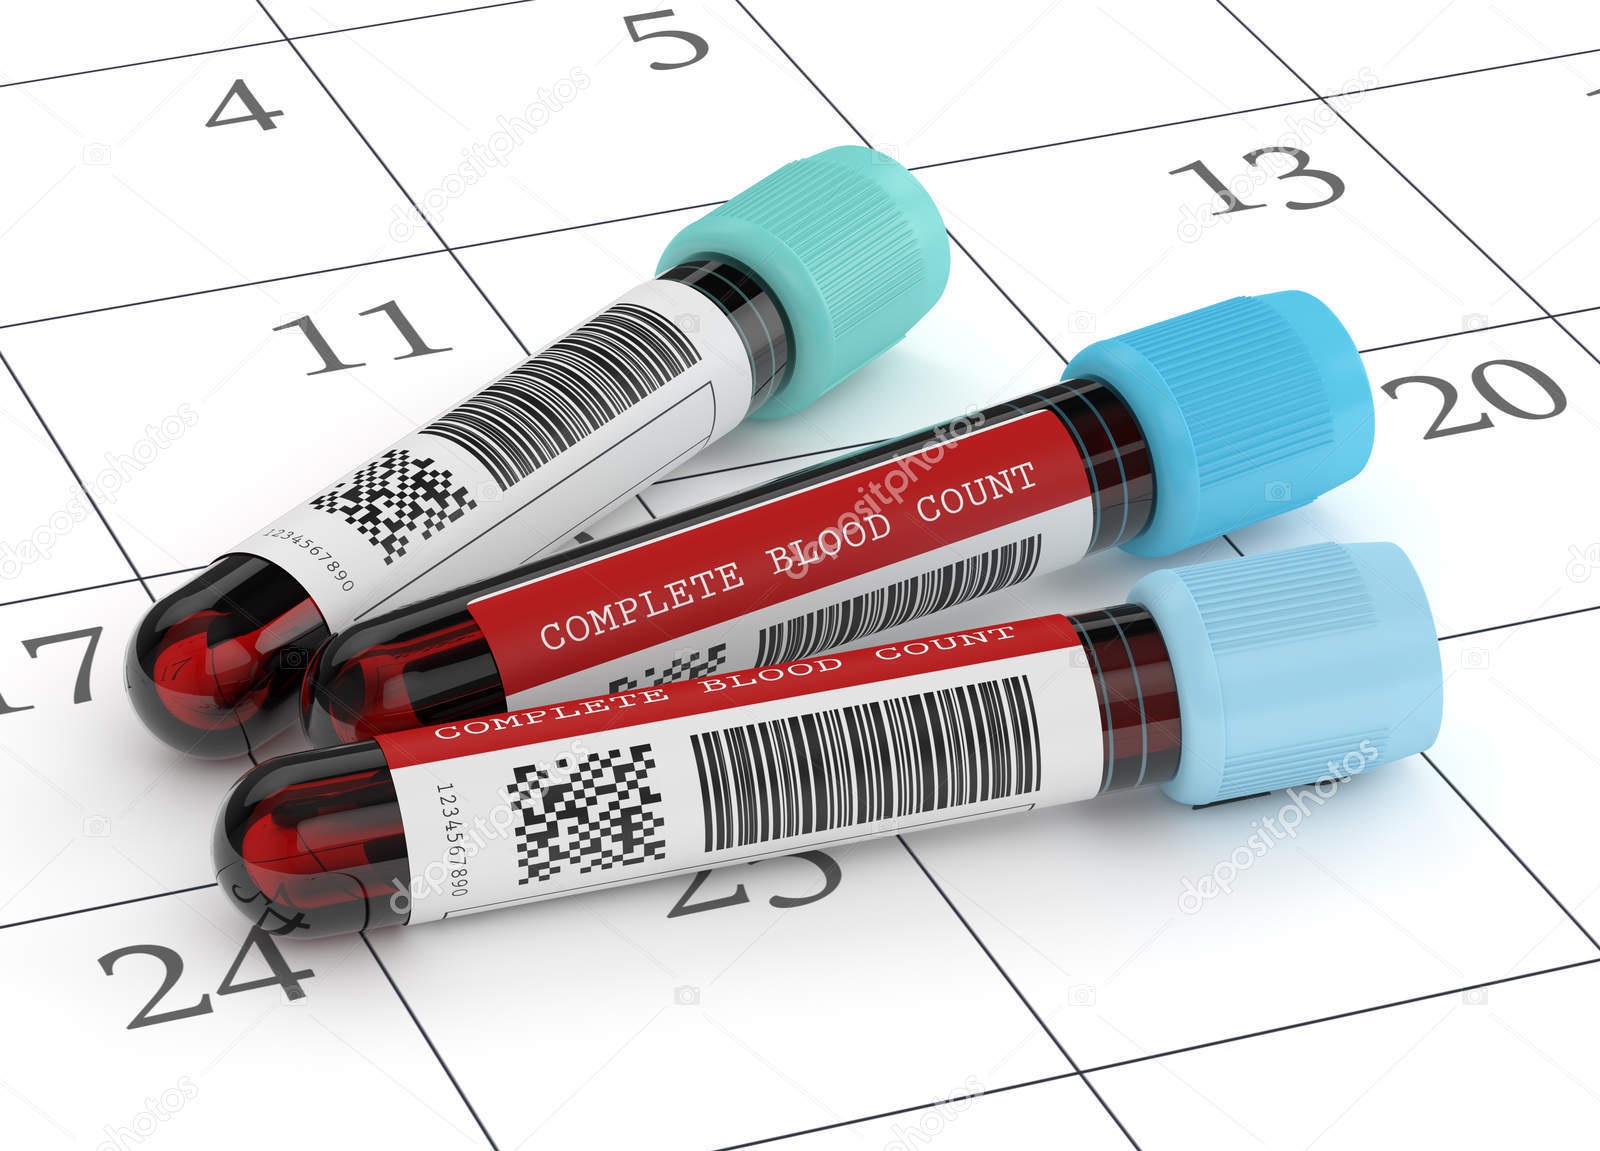 What does a Complete Blood Count measure? A complete guide